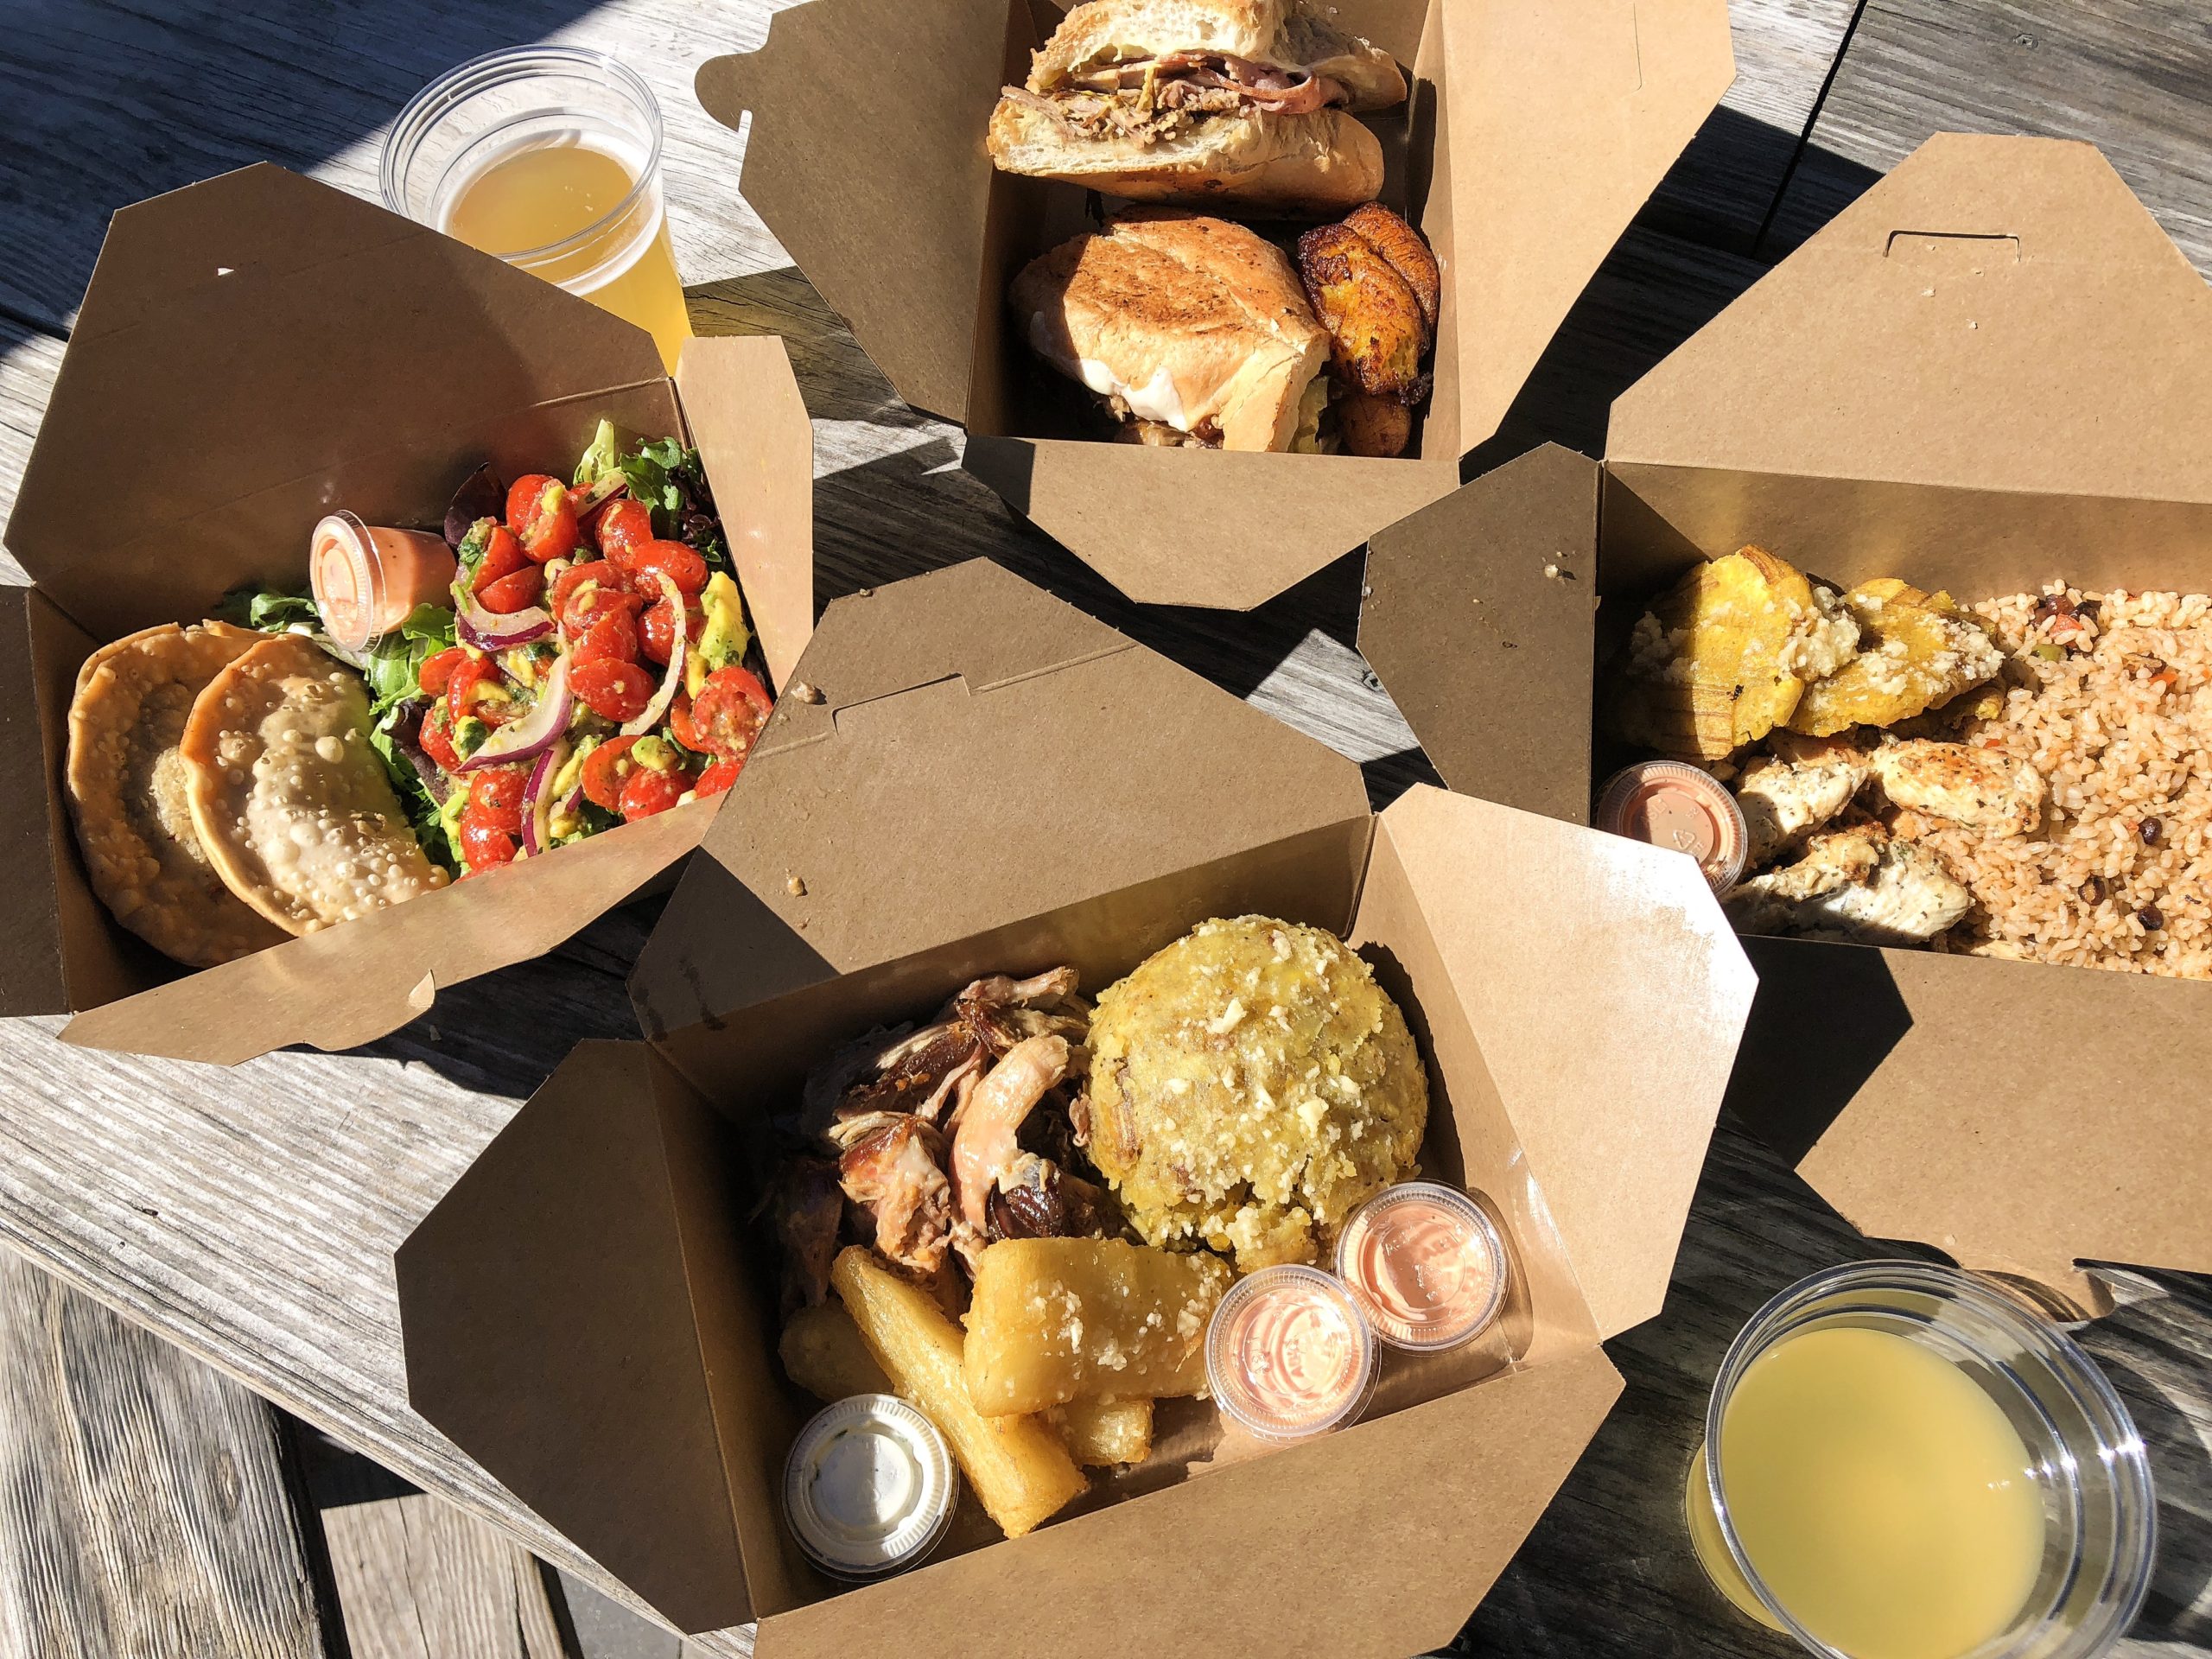 Avocado Salad and Empanadas, Mofongo with Pork, Latin Lunch Box with Chicken and The Cuban